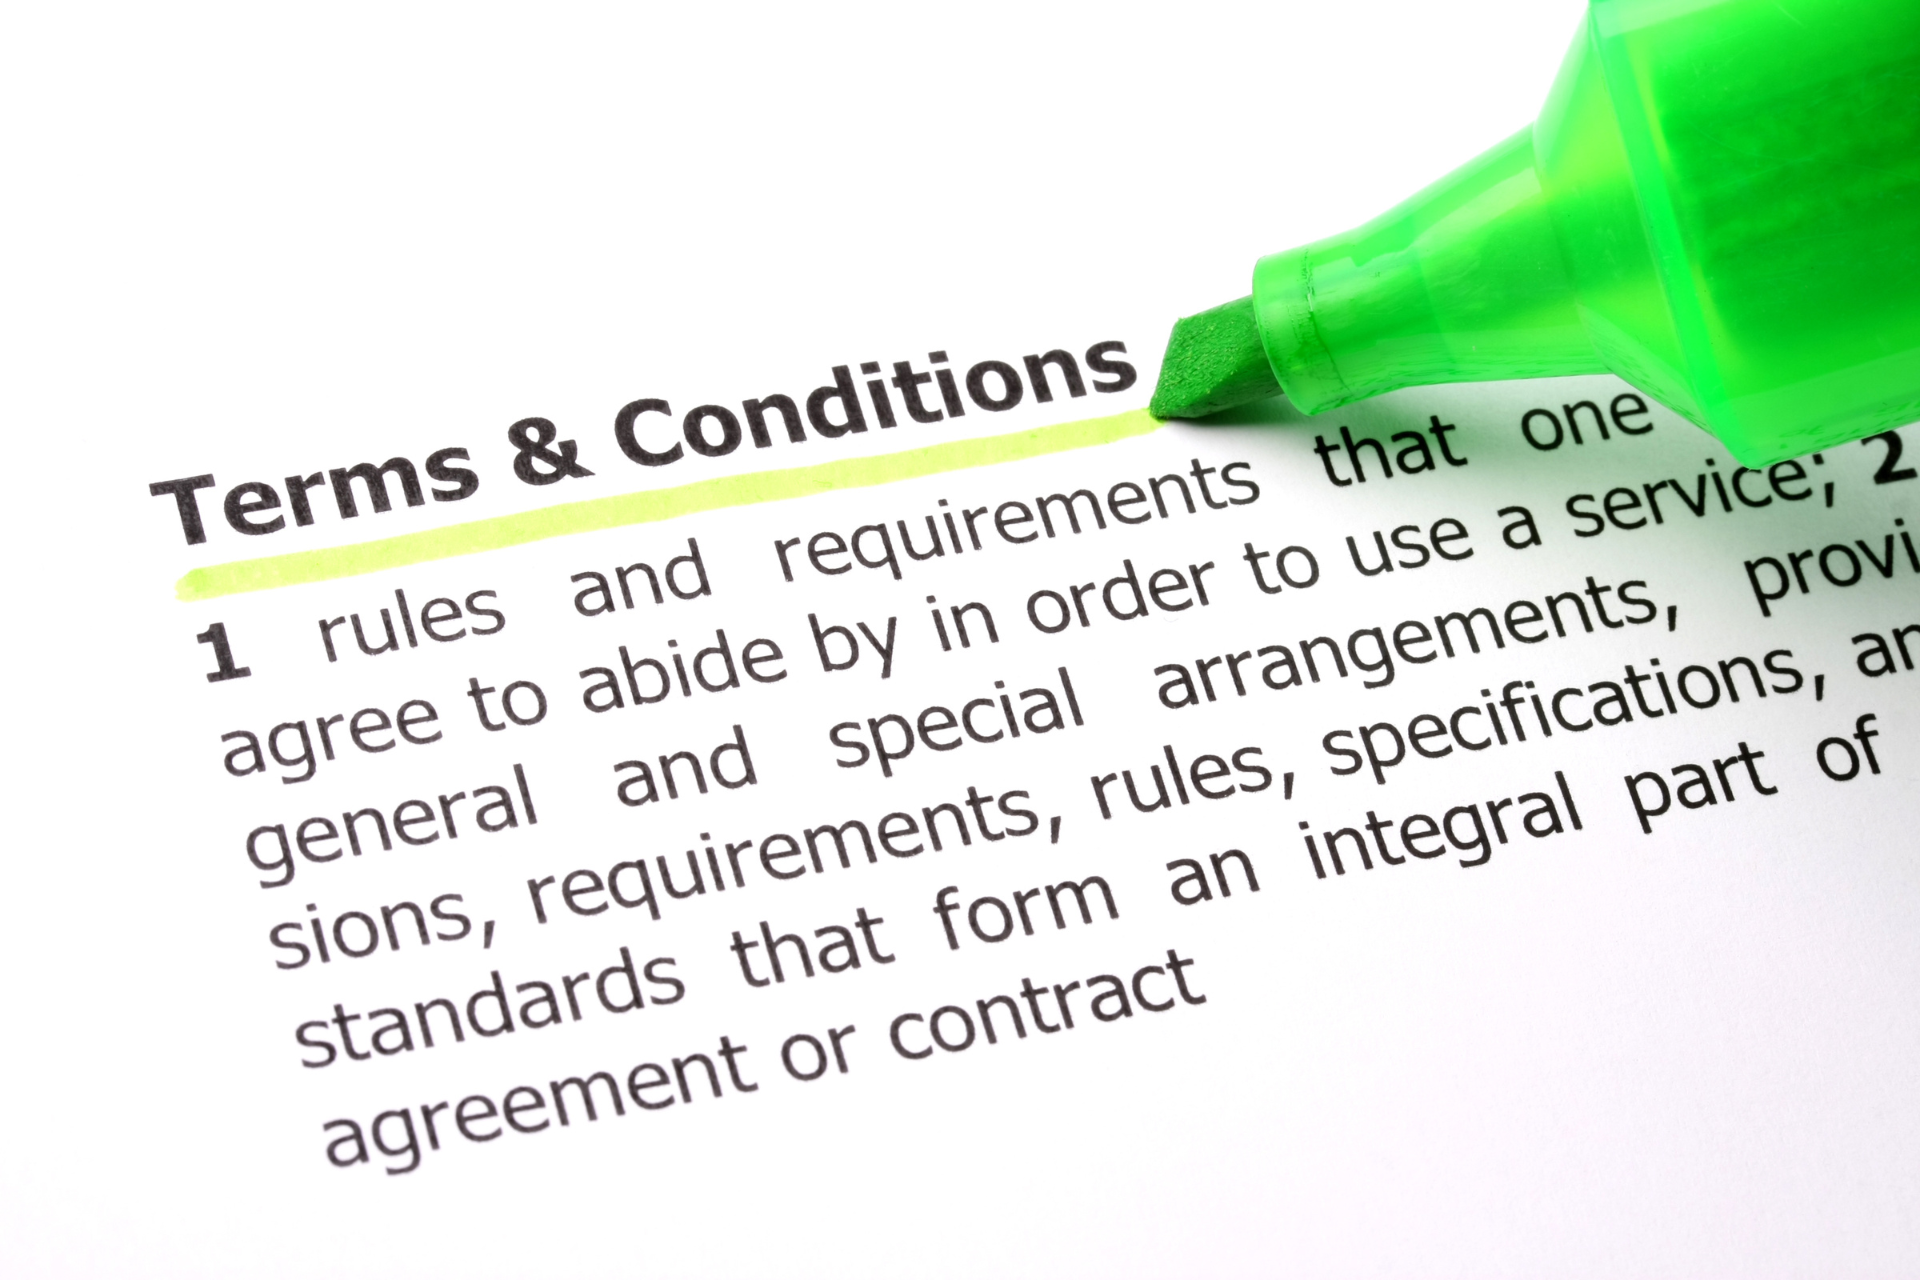 terms-and-conditions-on-contract